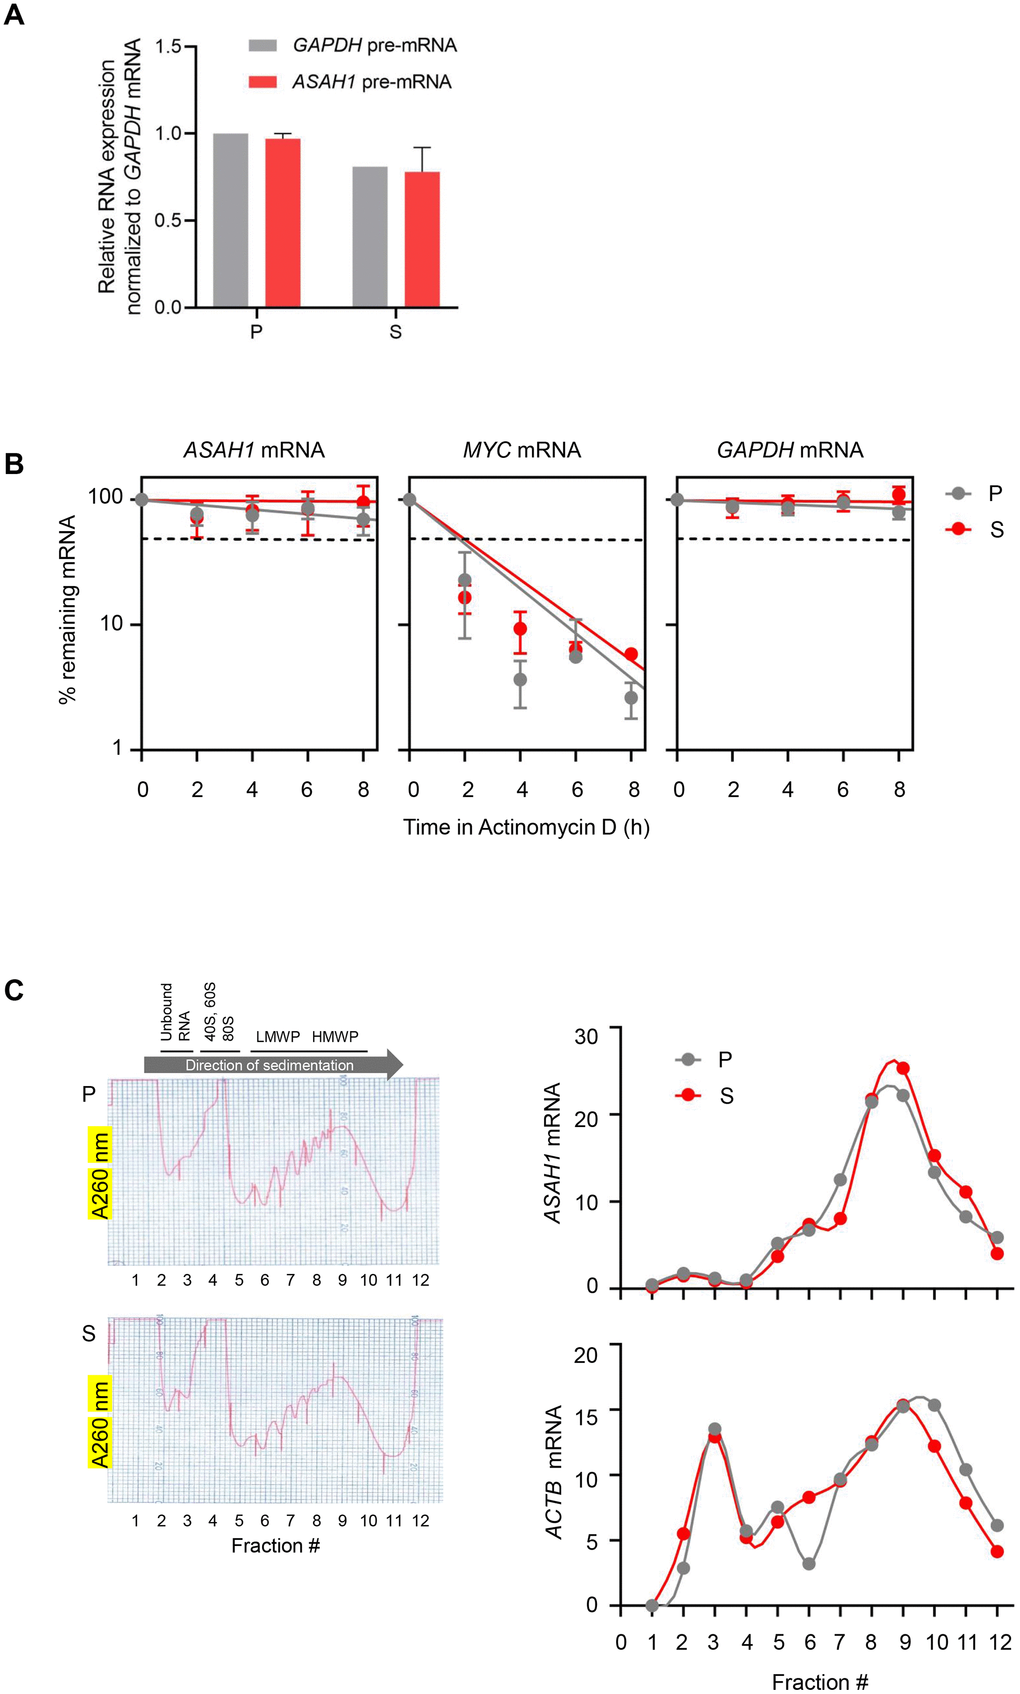 ASAH1 mRNA stability and translation in senescent cells. (A) RT-qPCR analysis of the levels of ASAH1 and GAPDH pre-mRNAs using total RNA from proliferating (P) and senescent (S) cells upon replicative exhaustion and normalized to GAPDH mRNA levels. (B) Proliferating and senescent cells were treated with Actinomycin D for the times indicated to block transcription; total RNA was then isolated, and RT-qPCR analysis was performed to assess the levels of ASAH1 mRNA. The labile MYC mRNA and the stable GAPDH mRNA were included as control transcripts. Discontinuous line indicates 50% of the original levels of mRNAs at time 0. (C) Cytoplasmic lysates obtained from P and S cells were fractionated through sucrose gradients to assess global polysome distribution profiles; ‘Unbound RNA’ fractions, fractions containing small ribosomal subunits (‘40S’), large ribosomal subunits (‘60S’), and monosomes (‘80S’), as well as polysomes of low and high molecular weight (LMWP and HMWP) are indicated. The relative distribution of ASAH1 mRNA and housekeeping ACTB (β-actin) mRNA was studied by RT-qPCR analysis of RNA in each of 12 gradient fractions. Data in (A) and (B) represent the means and S.D. from three independent experiments; data in C are representative of three independent experiments.